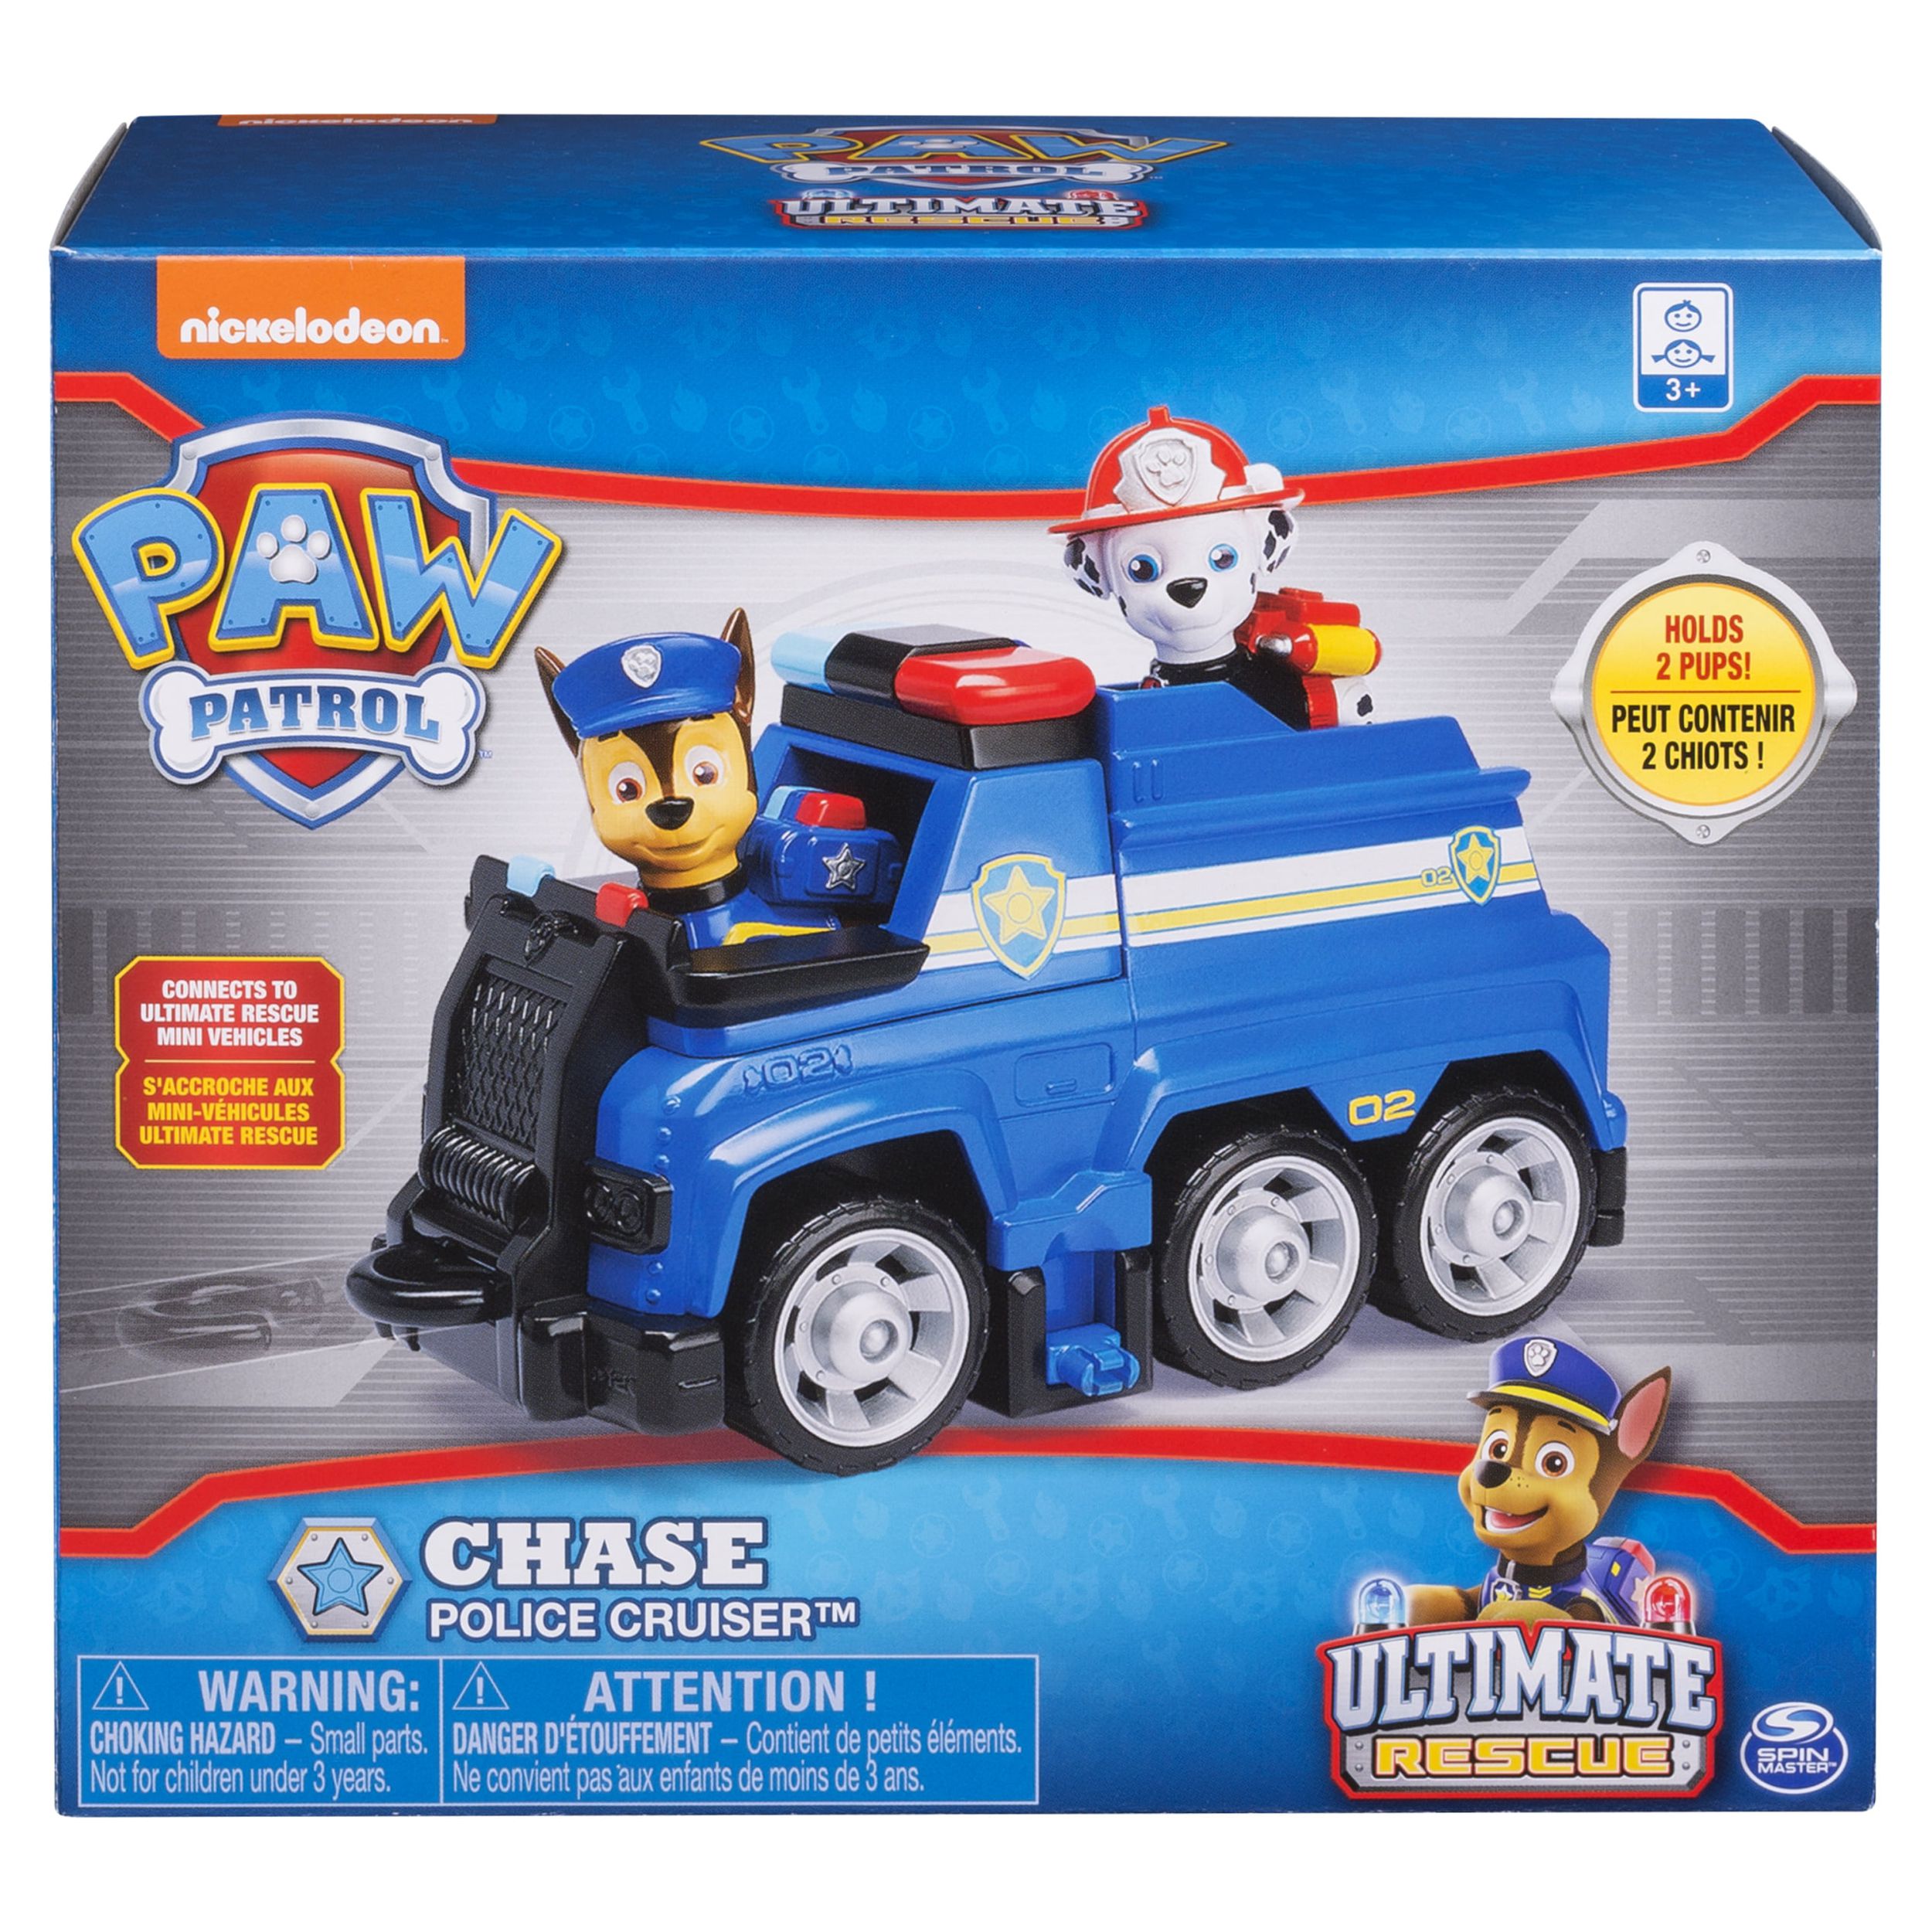 PAW Patrol Ultimate Rescue, Chase’s Ultimate Rescue Police Cruiser Vehicle, for Ages 3 and up - image 2 of 7